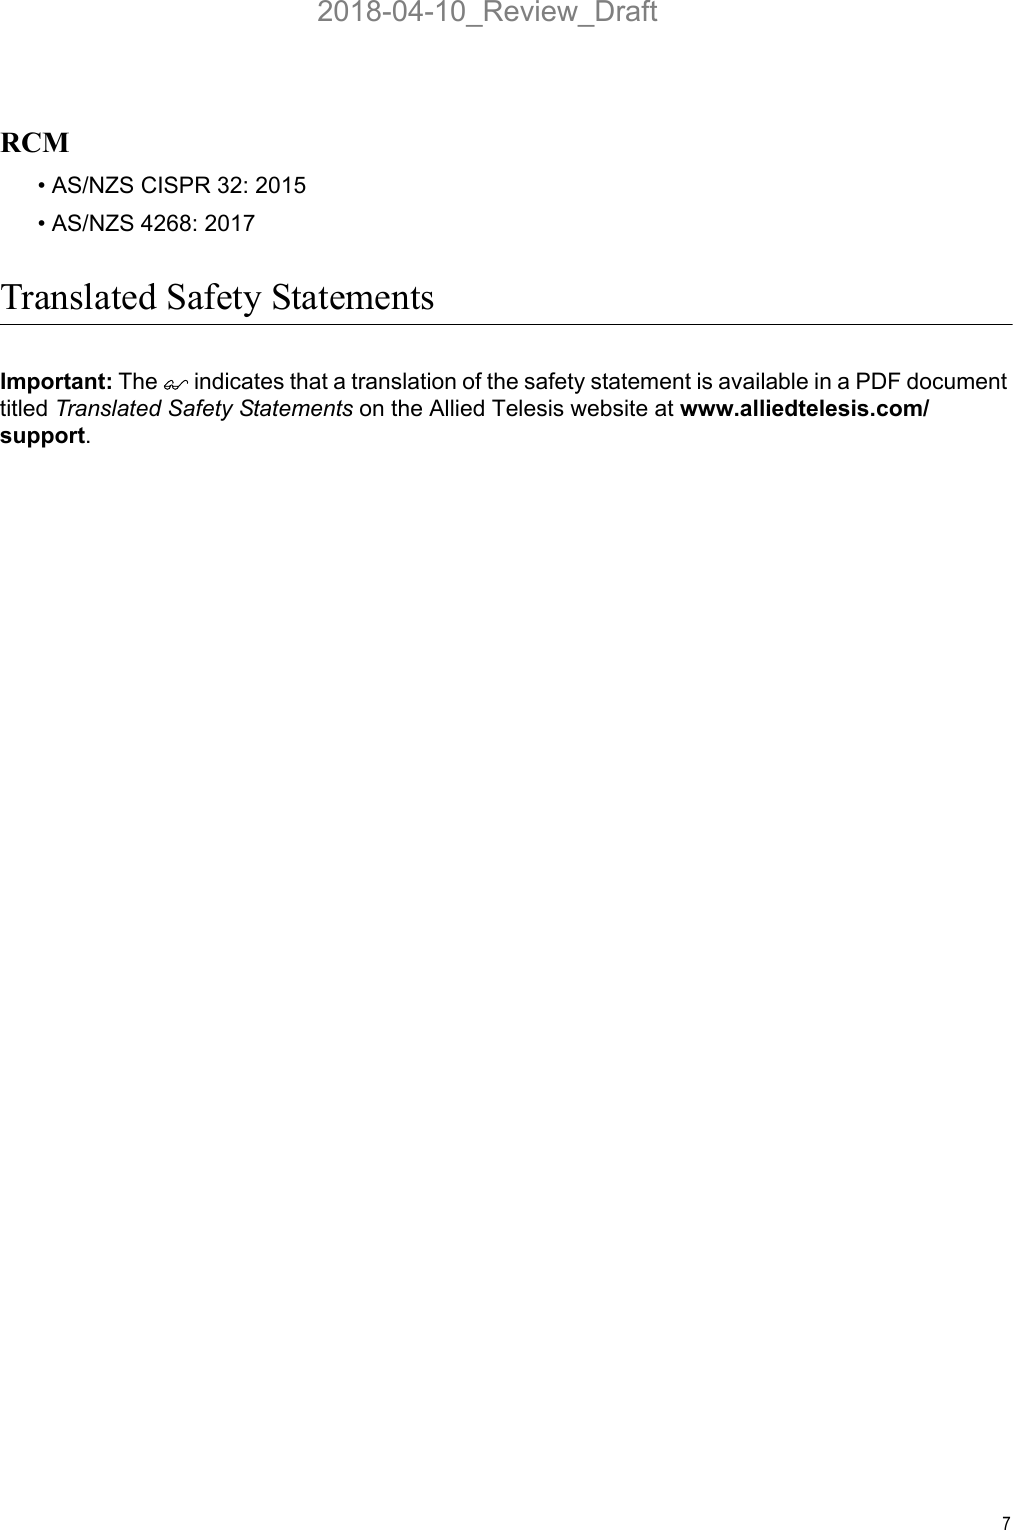 7RCM• AS/NZS CISPR 32: 2015• AS/NZS 4268: 2017Translated Safety StatementsImportant: The  indicates that a translation of the safety statement is available in a PDF document titled Translated Safety Statements on the Allied Telesis website at www.alliedtelesis.com/support.2018-04-10_Review_Draft